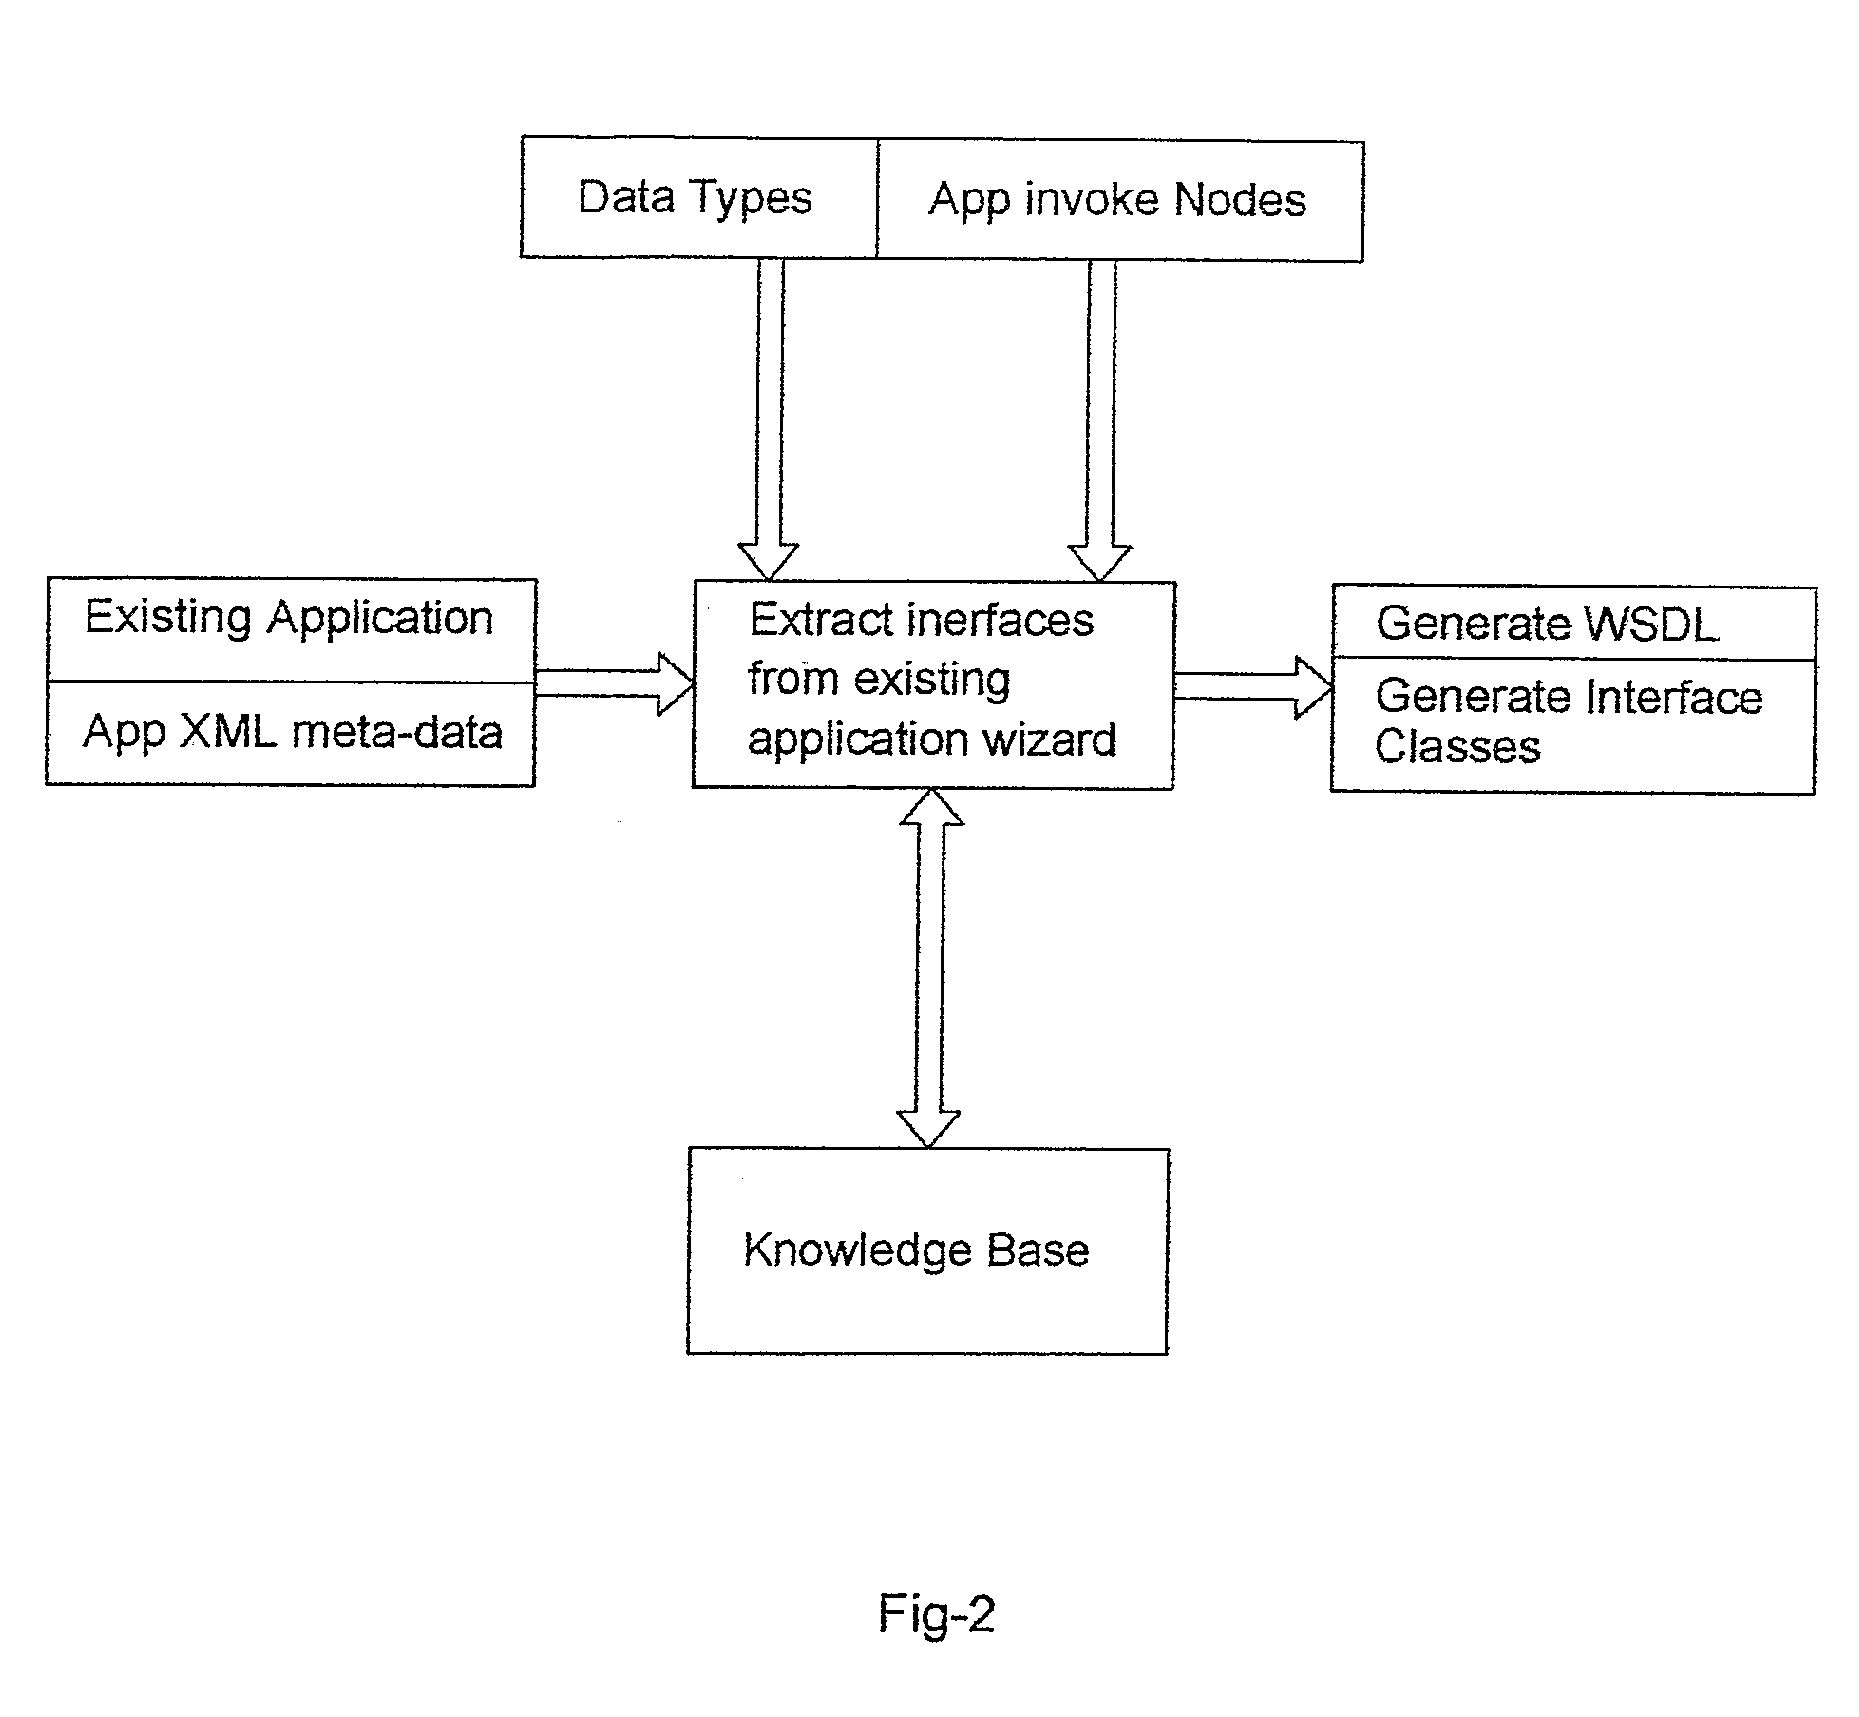 Apparatus for migration and conversion of software code from any source platform to any target platform